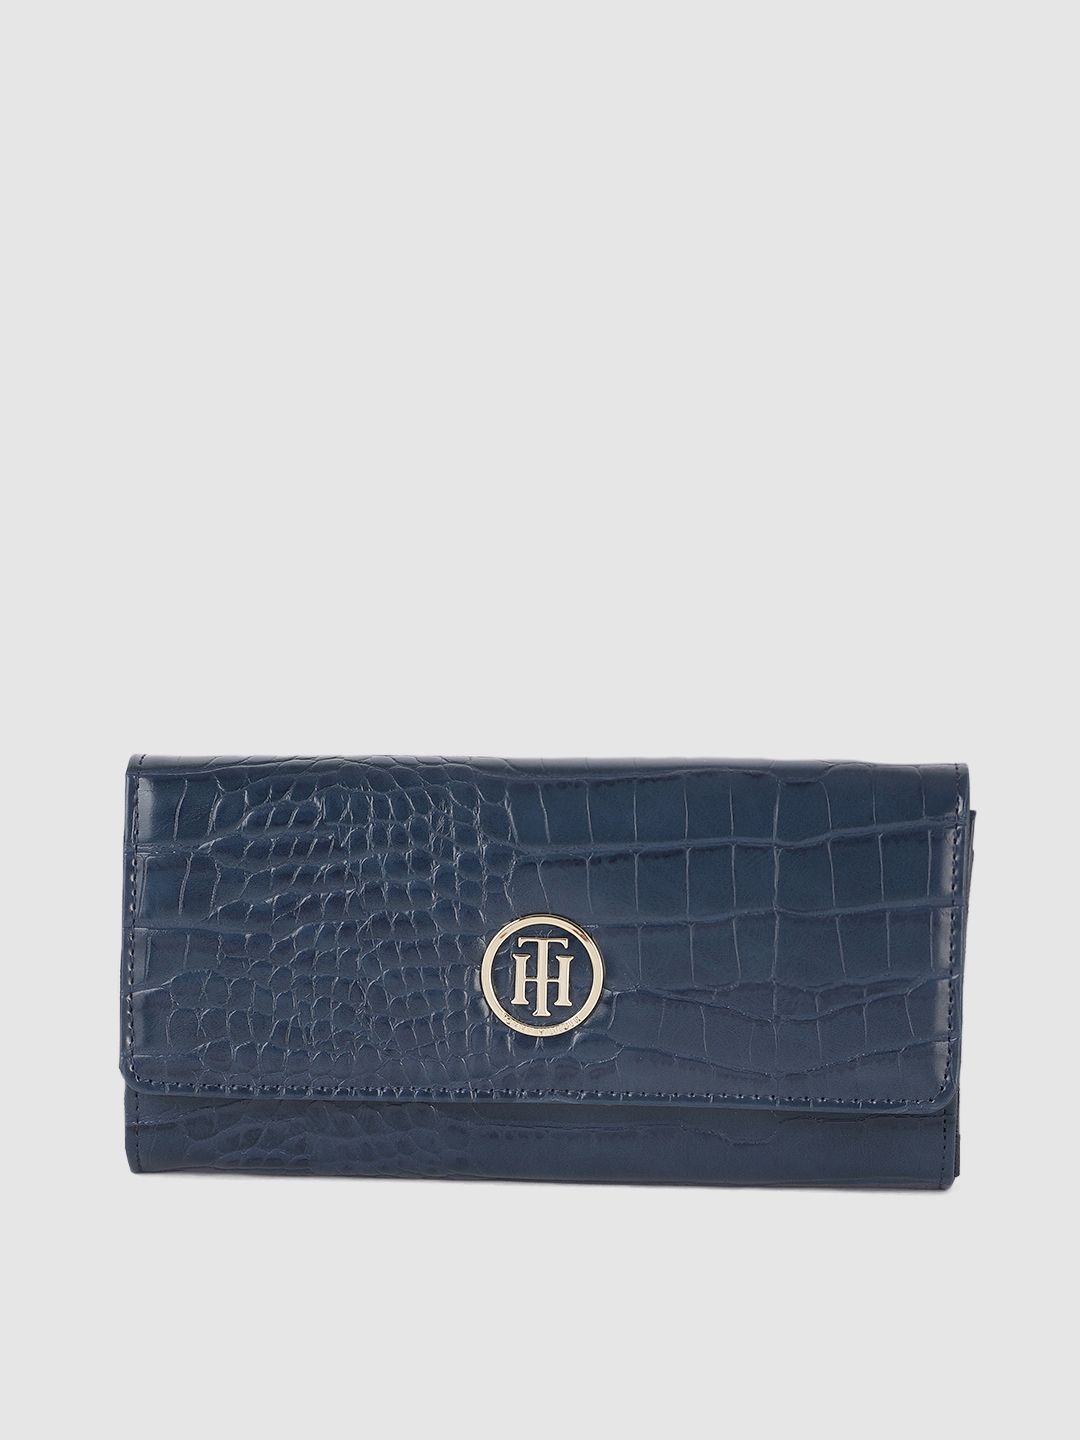 Tommy Hilfiger Women Navy Blue Textured Two Fold Wallet Price in India